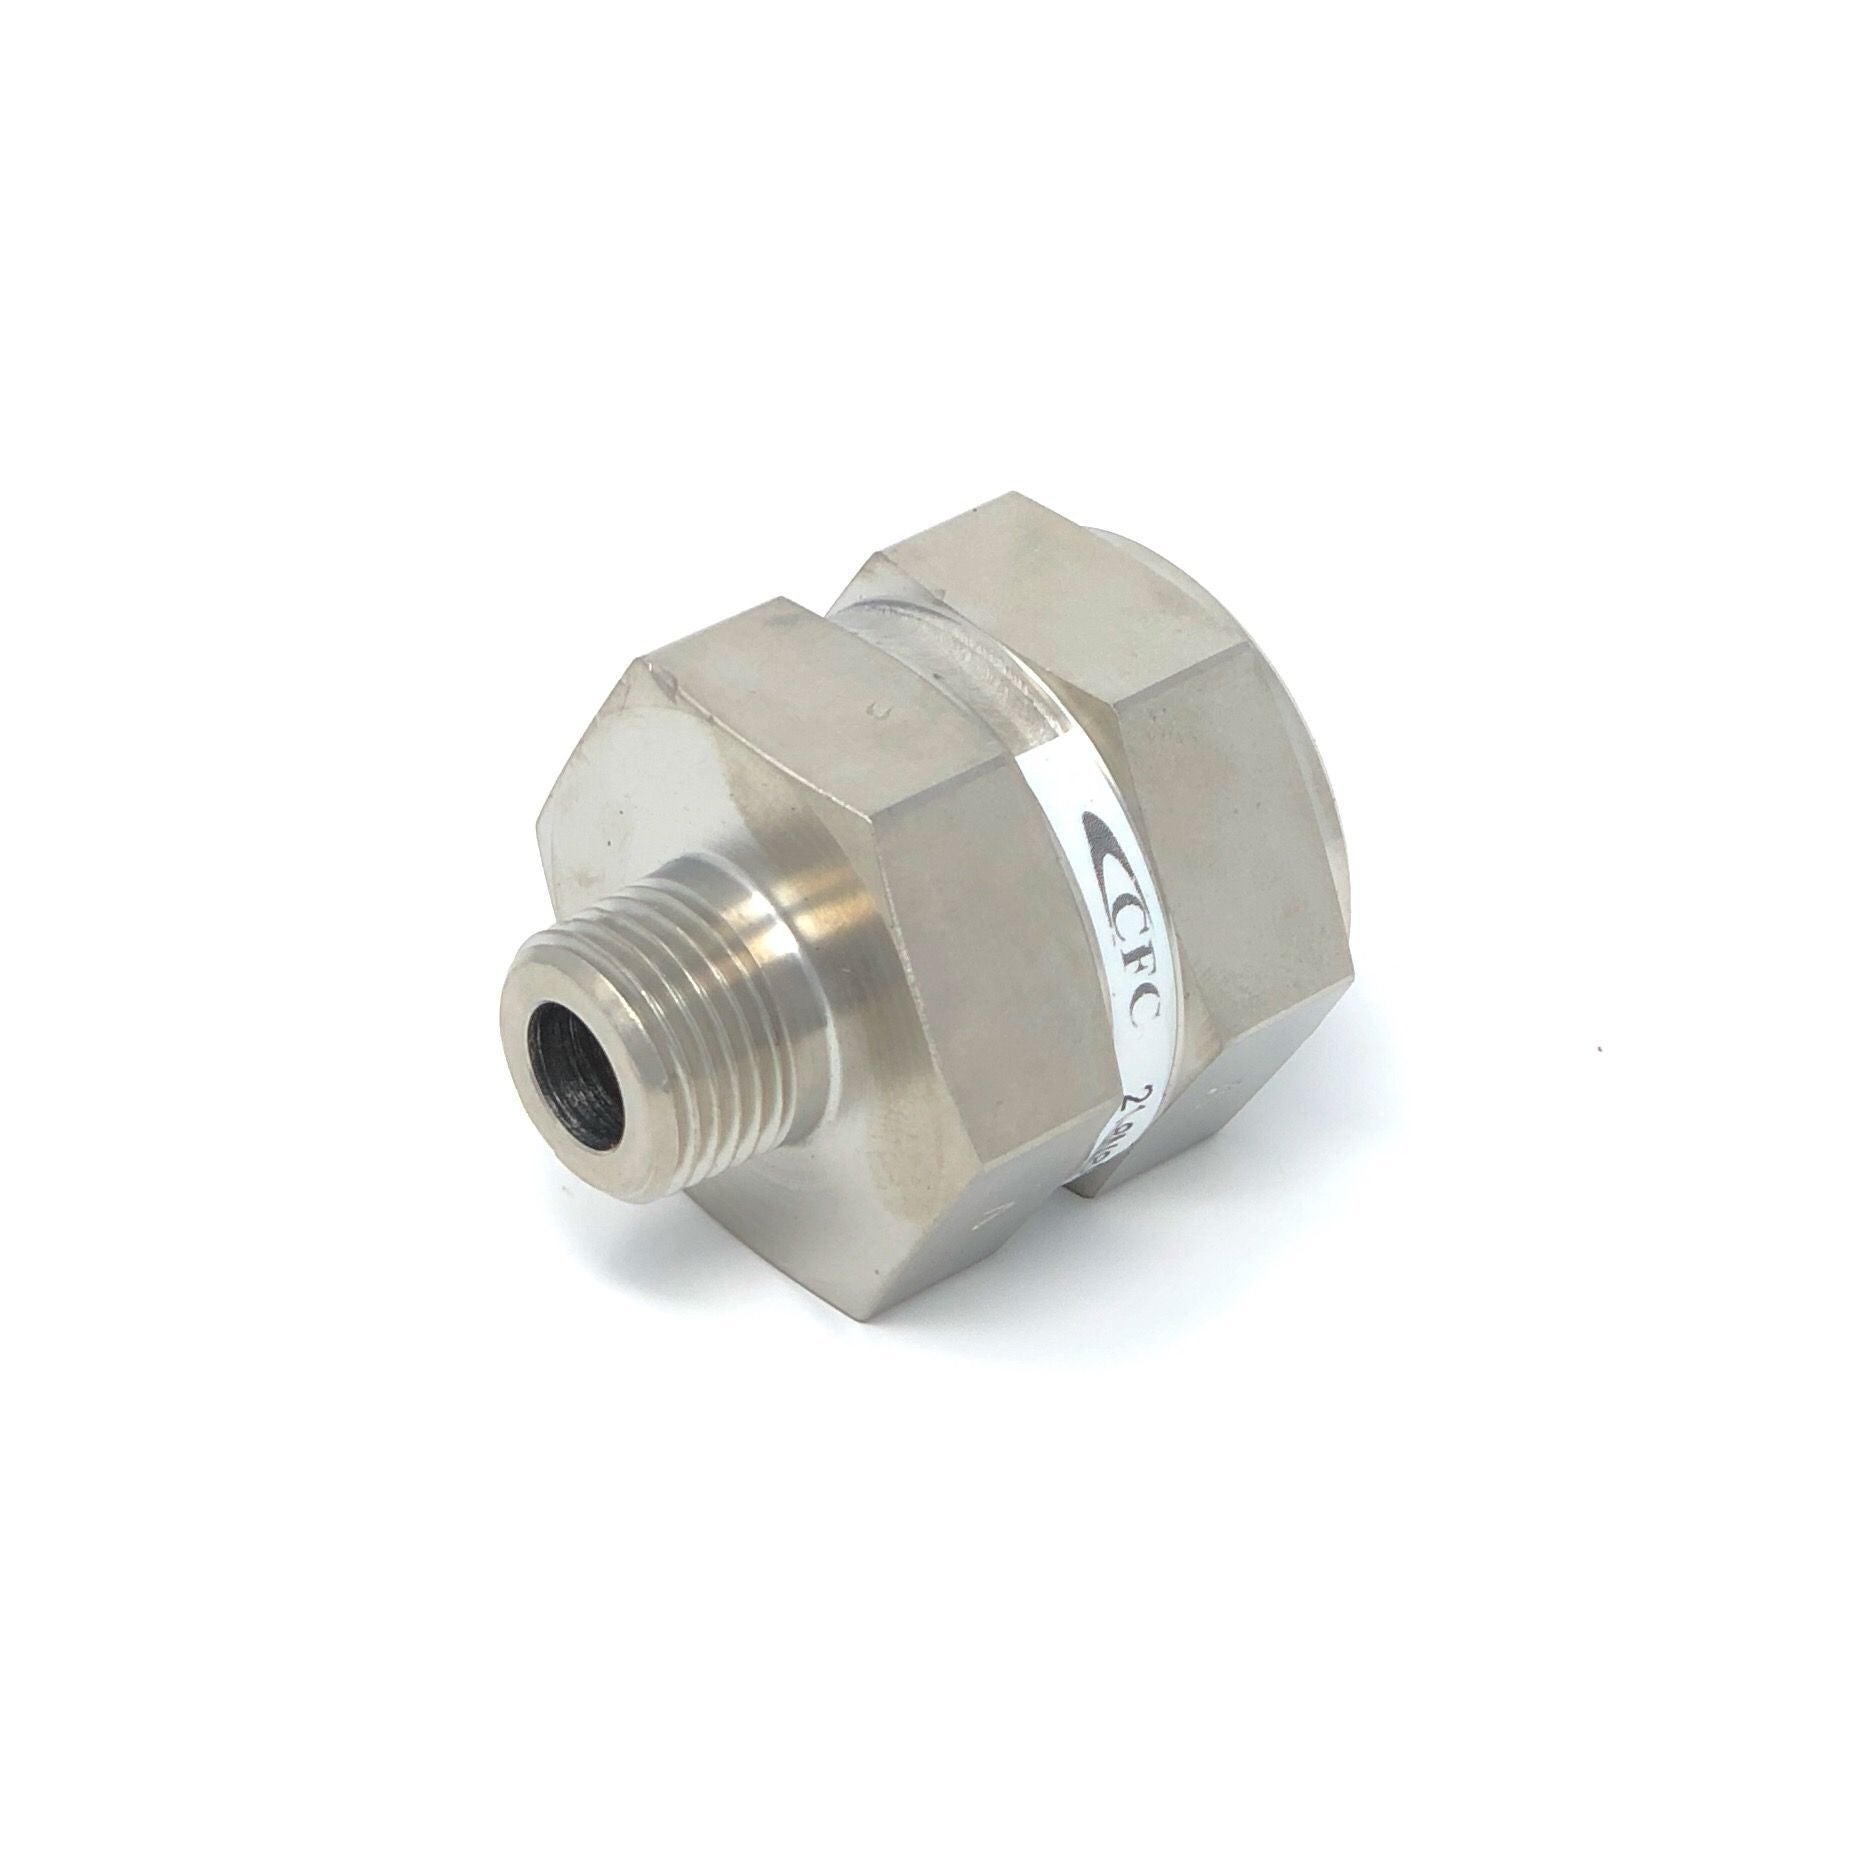 21-6P6P-40S : Chase High Pressure Inline Filter, 6000psi, 3/8" NPT, 40 Micron, No Visual Indicator, No Bypass